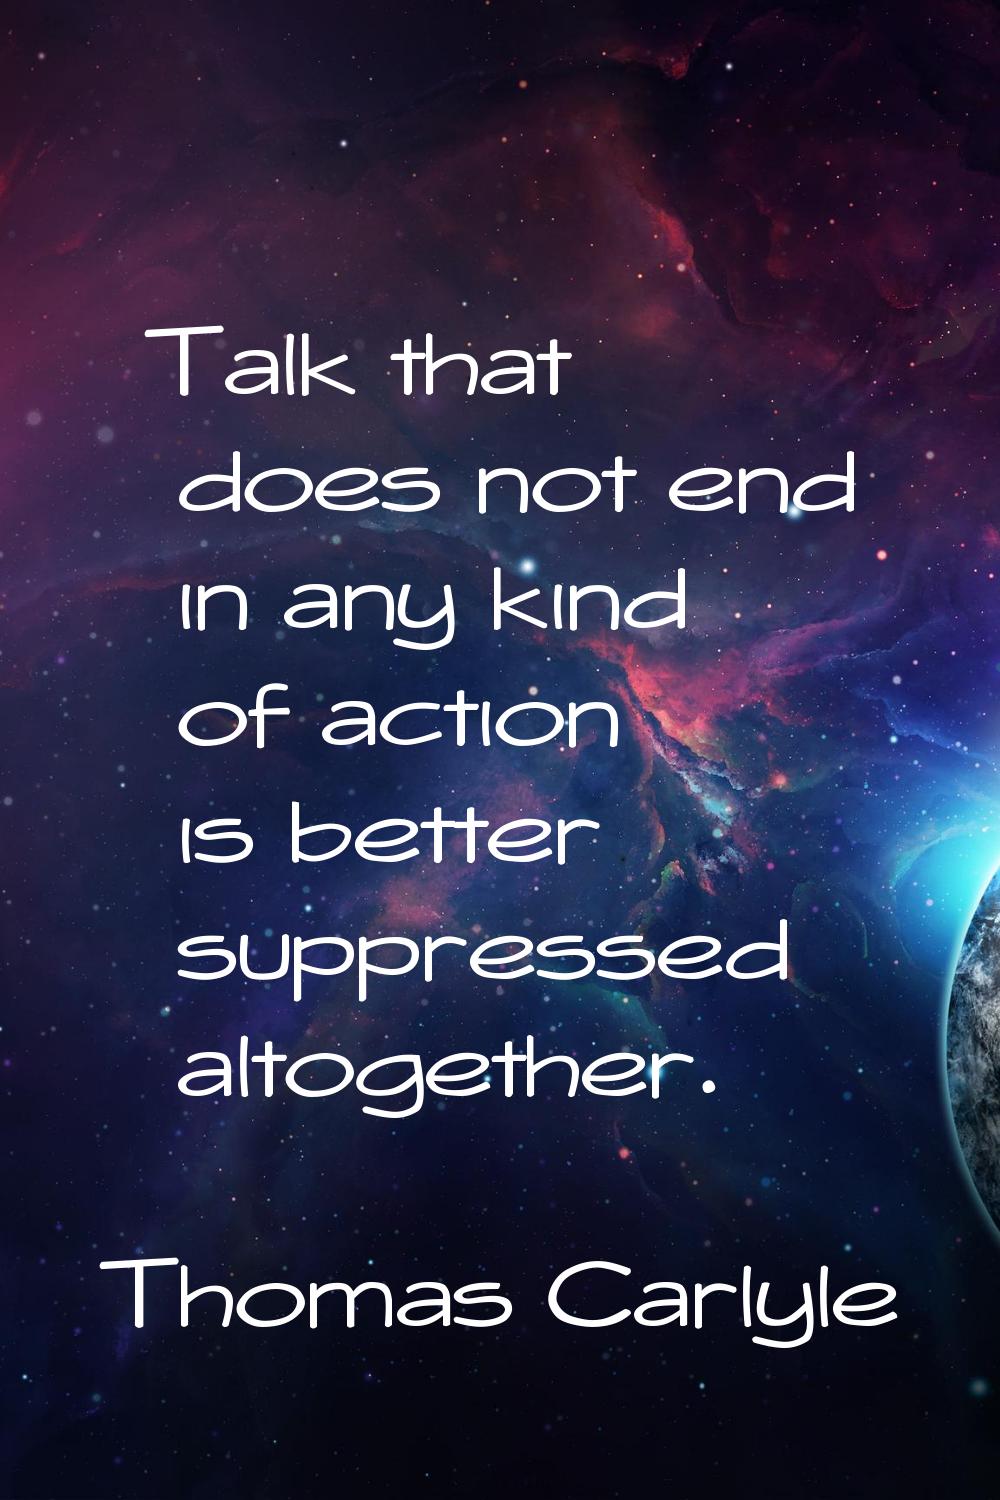 Talk that does not end in any kind of action is better suppressed altogether.